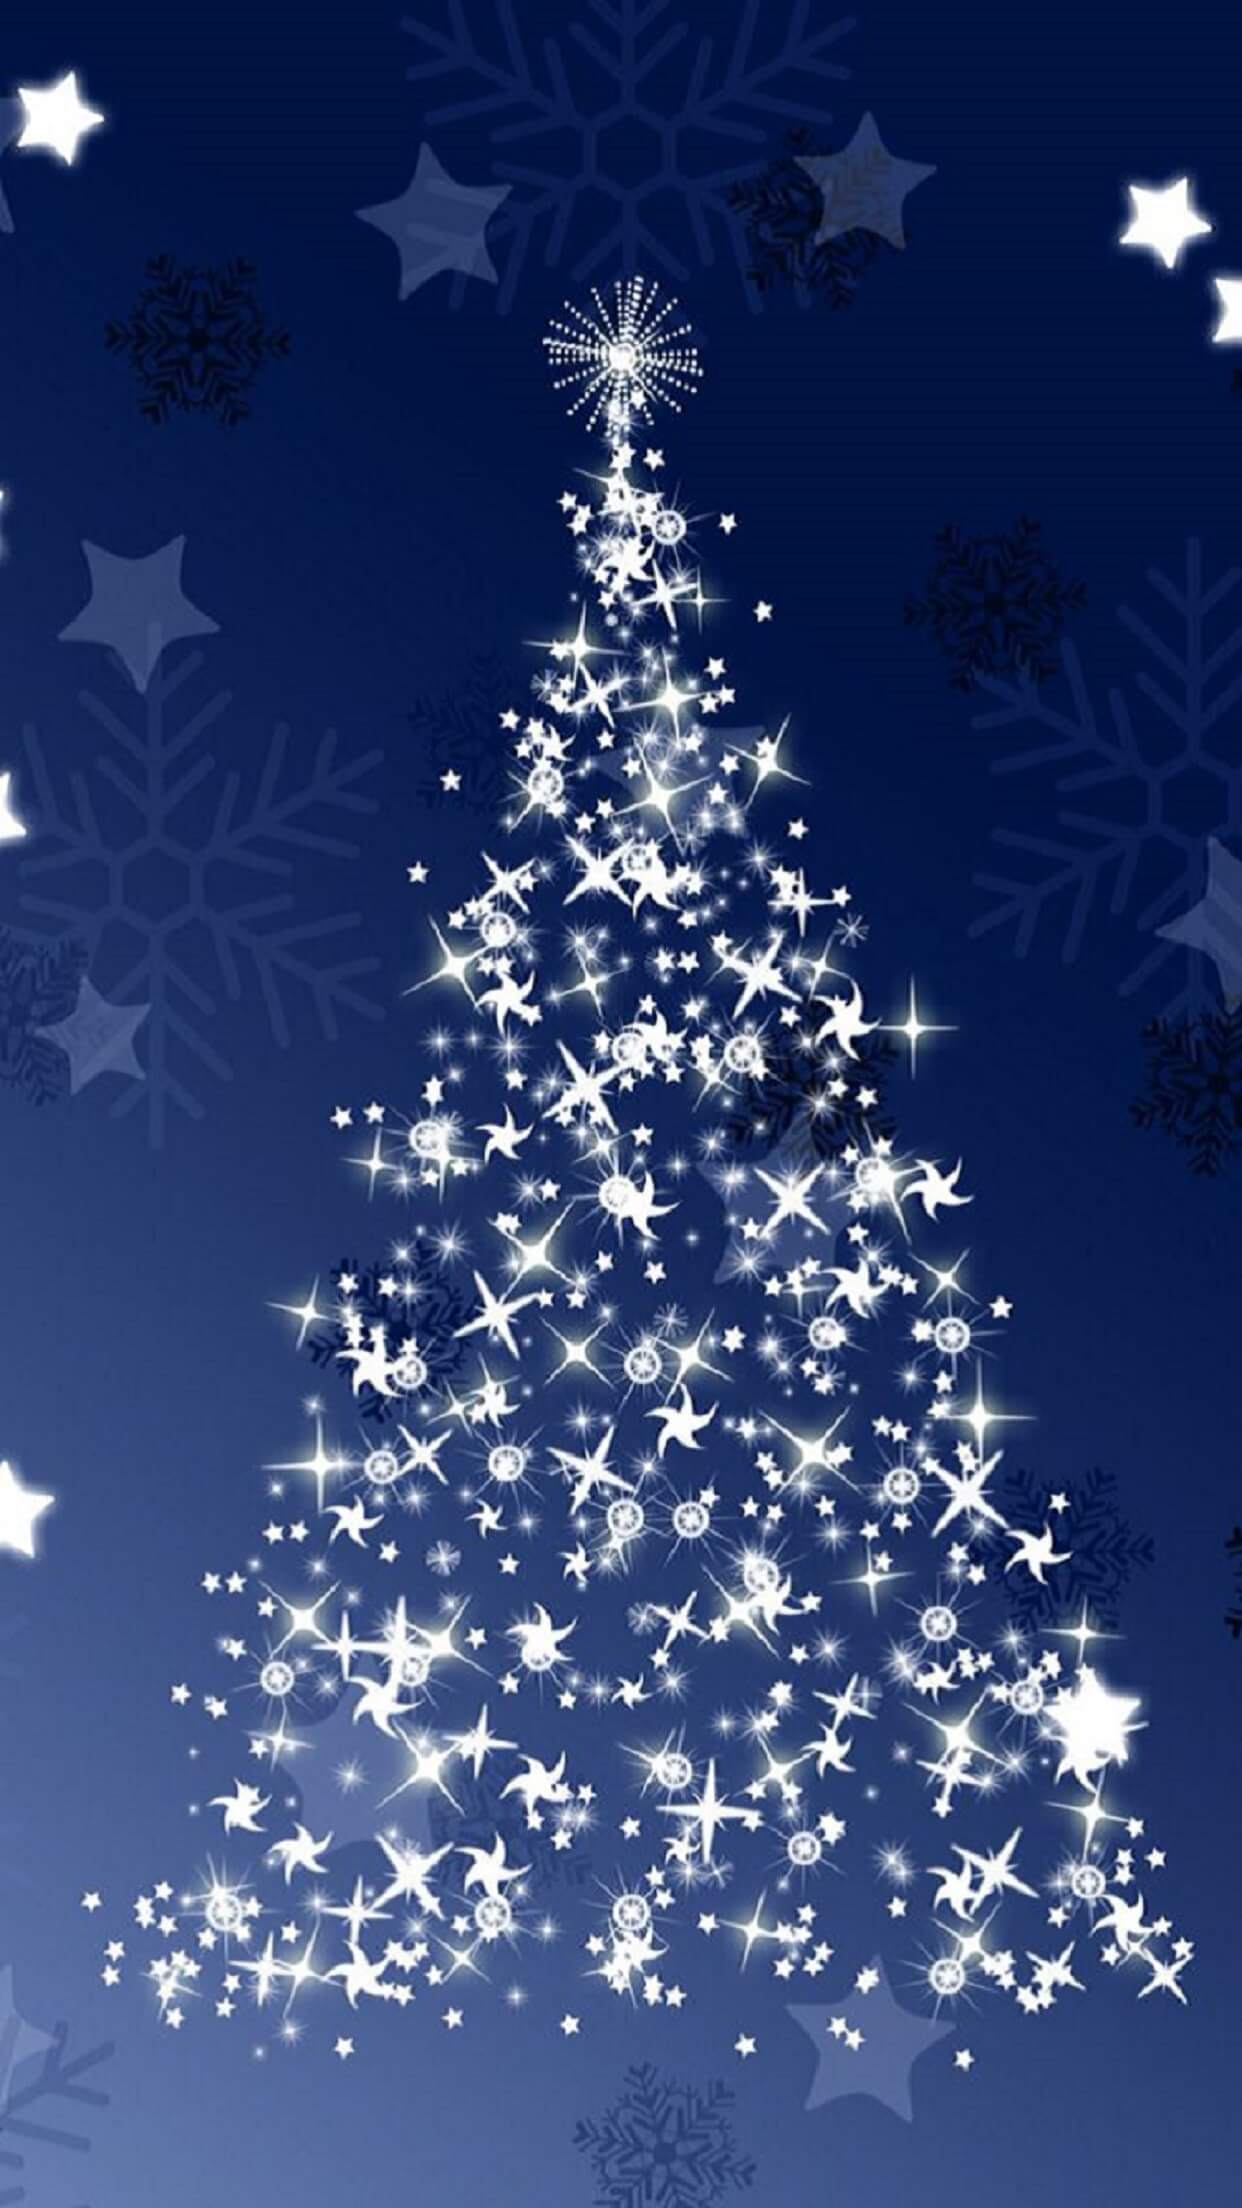 Try to Use 32 Christmas Wallpaper for iPhones